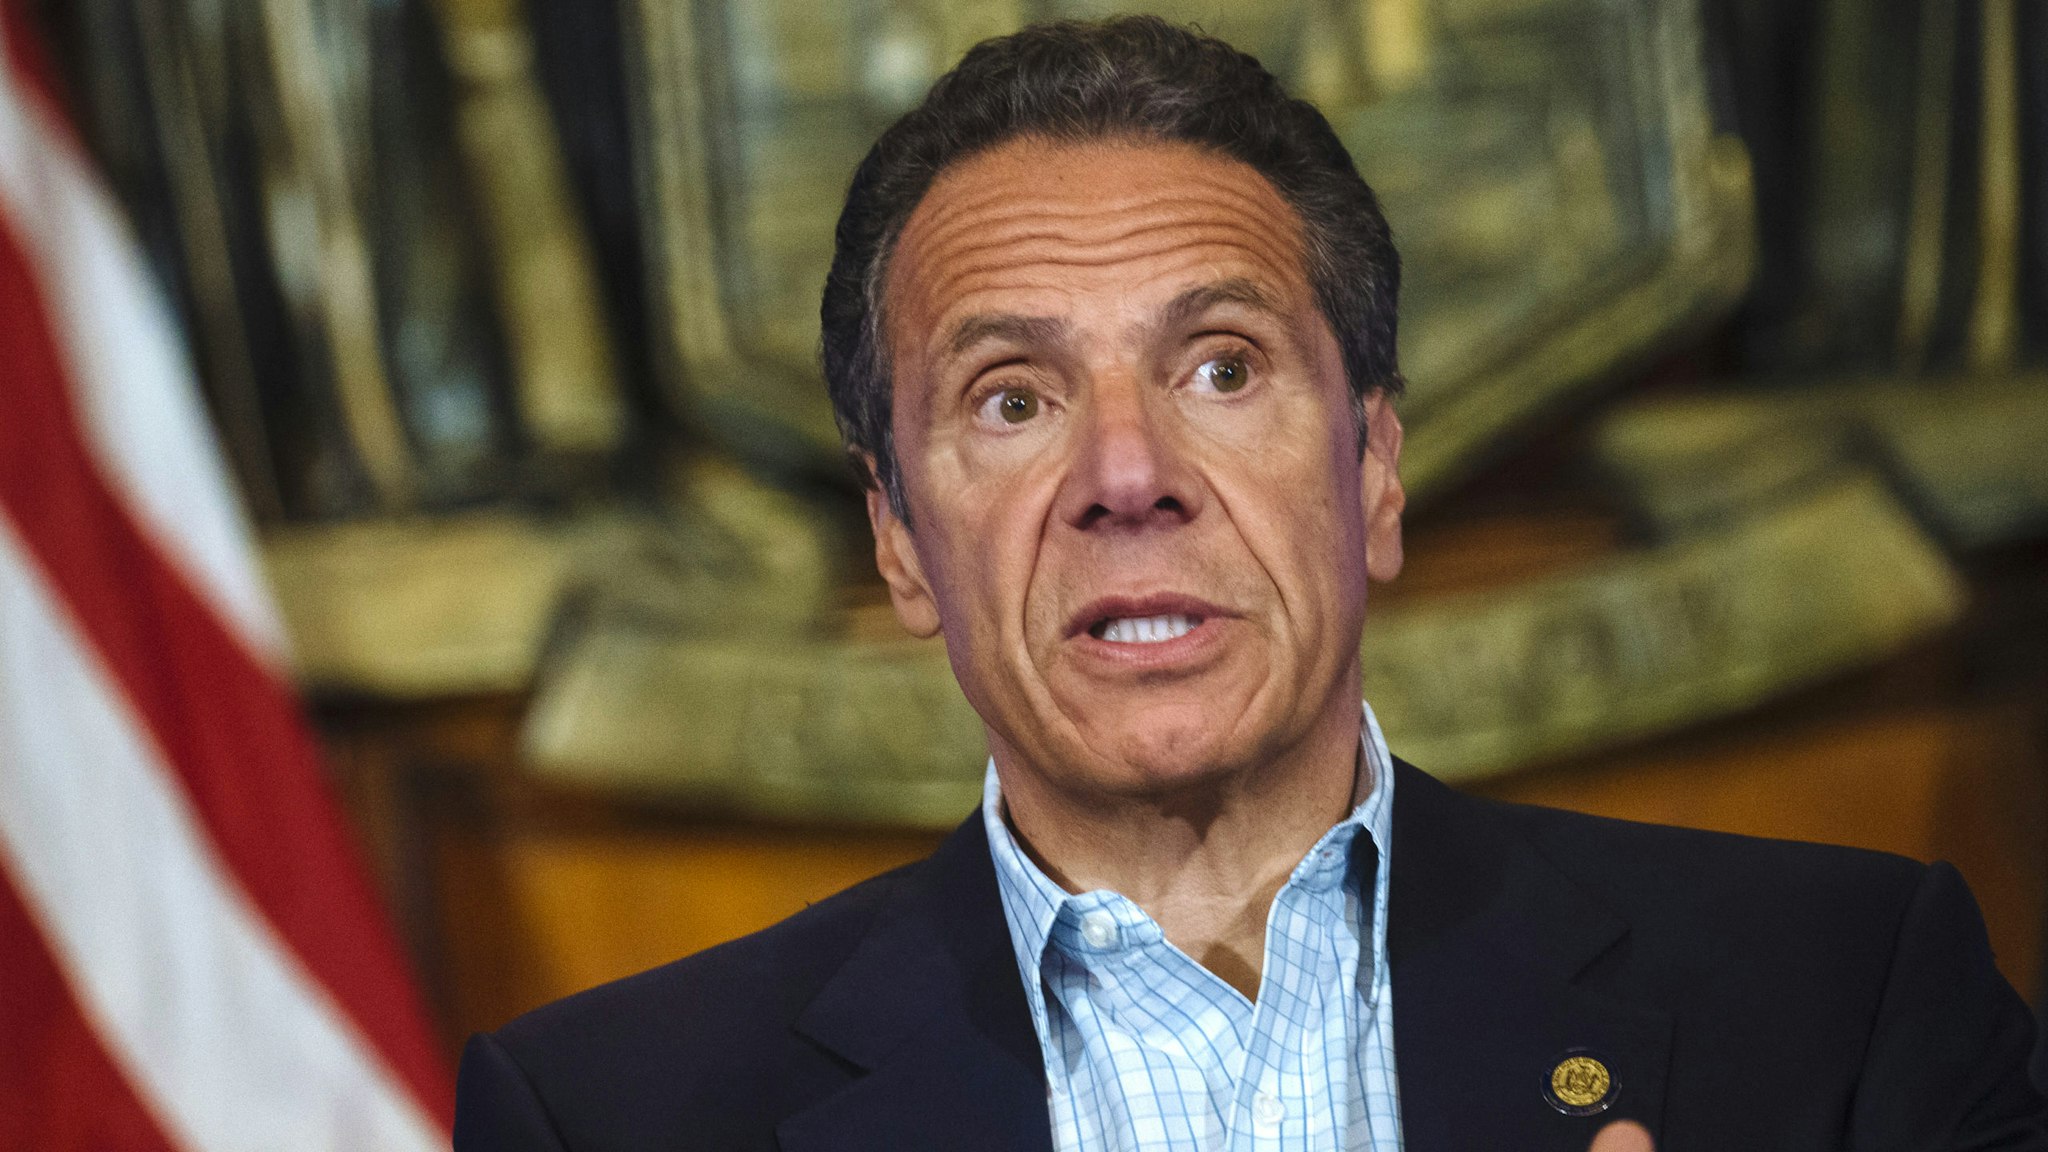 Andrew Cuomo, governor of New York, speaks during a news conference in the Red Room of the New York State Capitol Building in Albany, New York, U.S., on Sunday, May 17, 2020. Cuomo pleaded on Sunday for more New Yorkers to get tested for the coronavirus as the state reopens for business, engaging in a bit of political theater as he underwent a nasal swab test himself at his daily briefing.